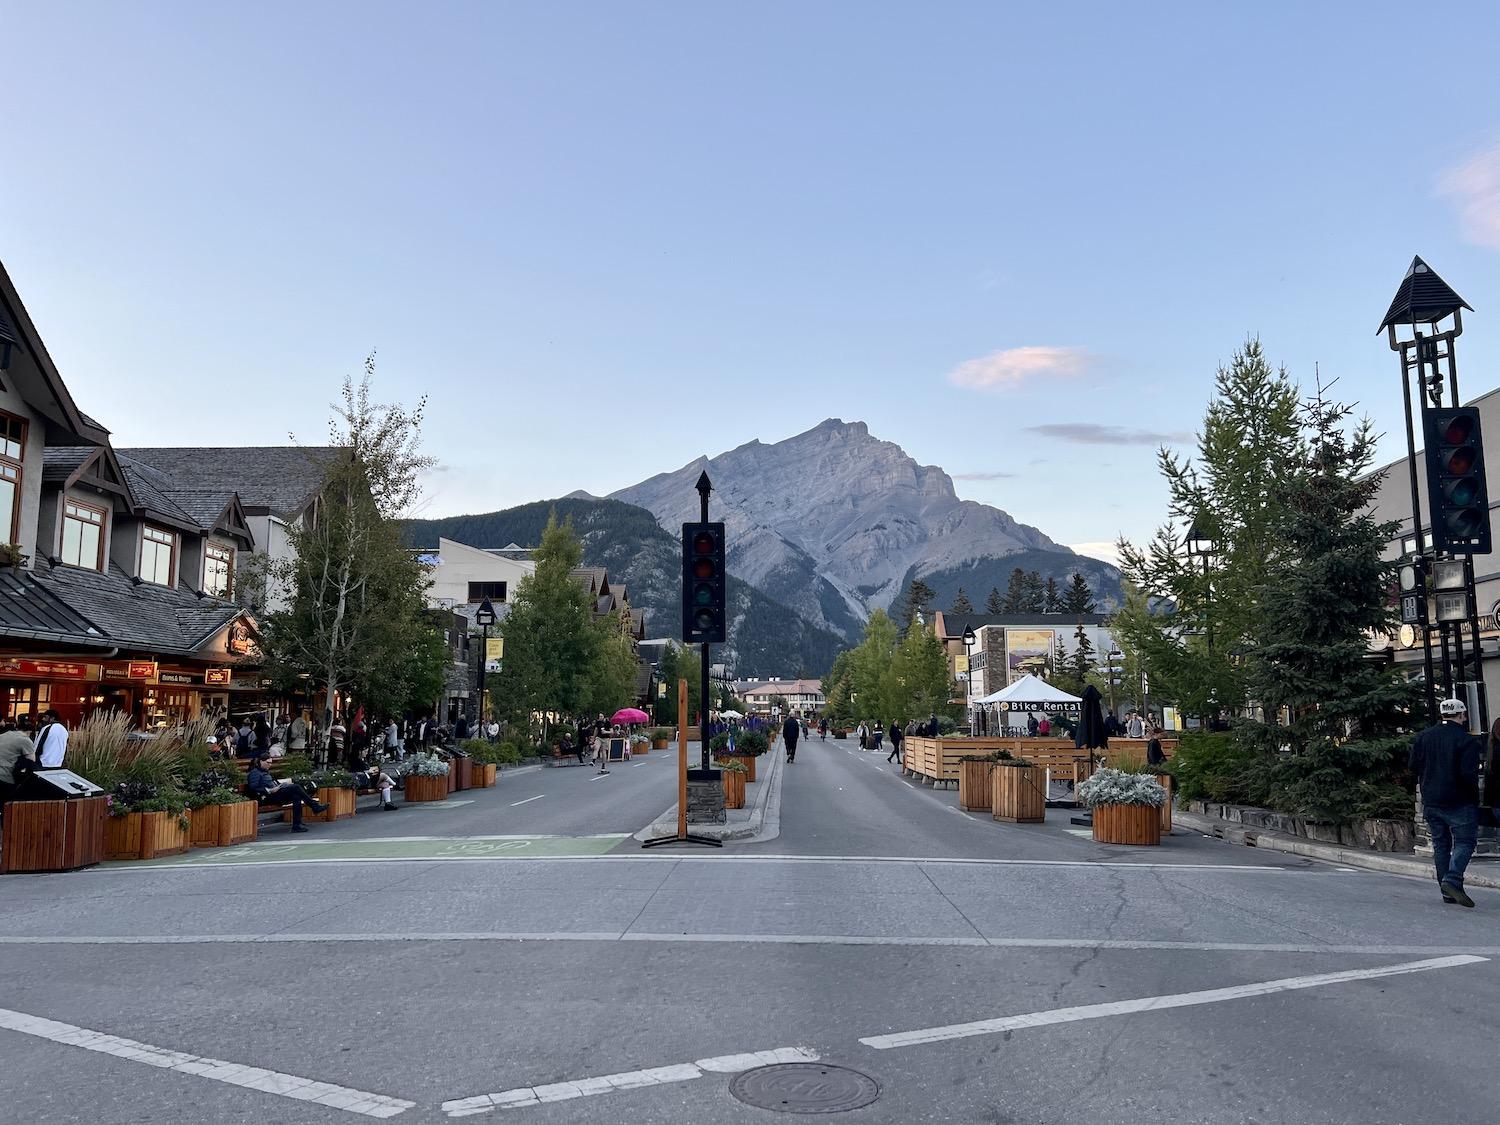 For a moment on this Sunday afternoon in September, downtown Banff wasn't overrun with visitors.